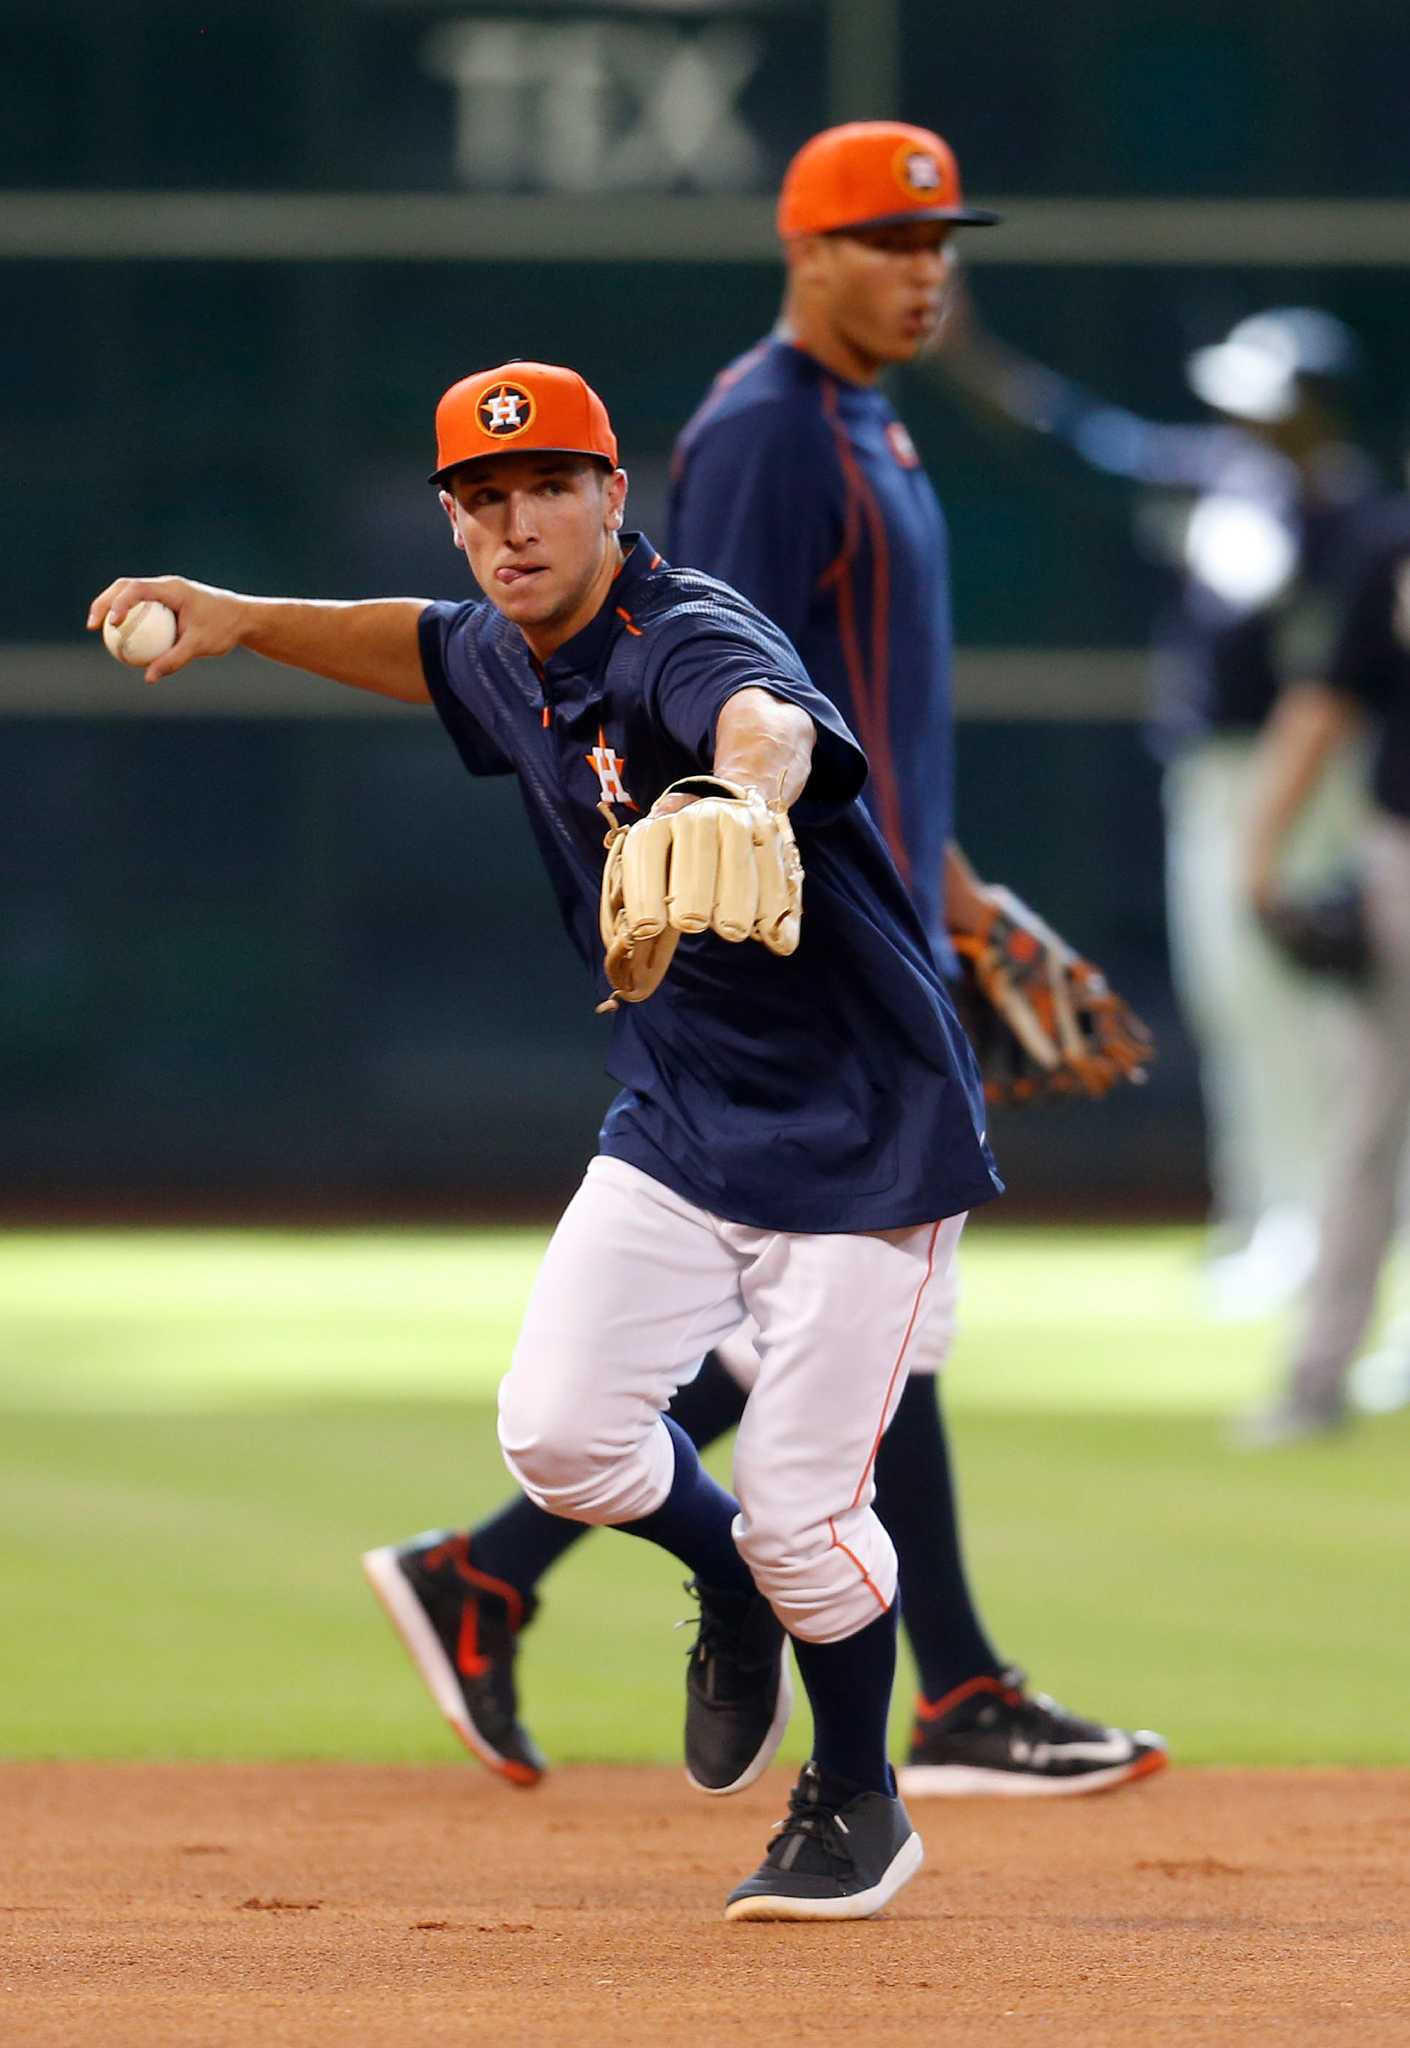 Top Astros draftee Bregman can't wait to get career started